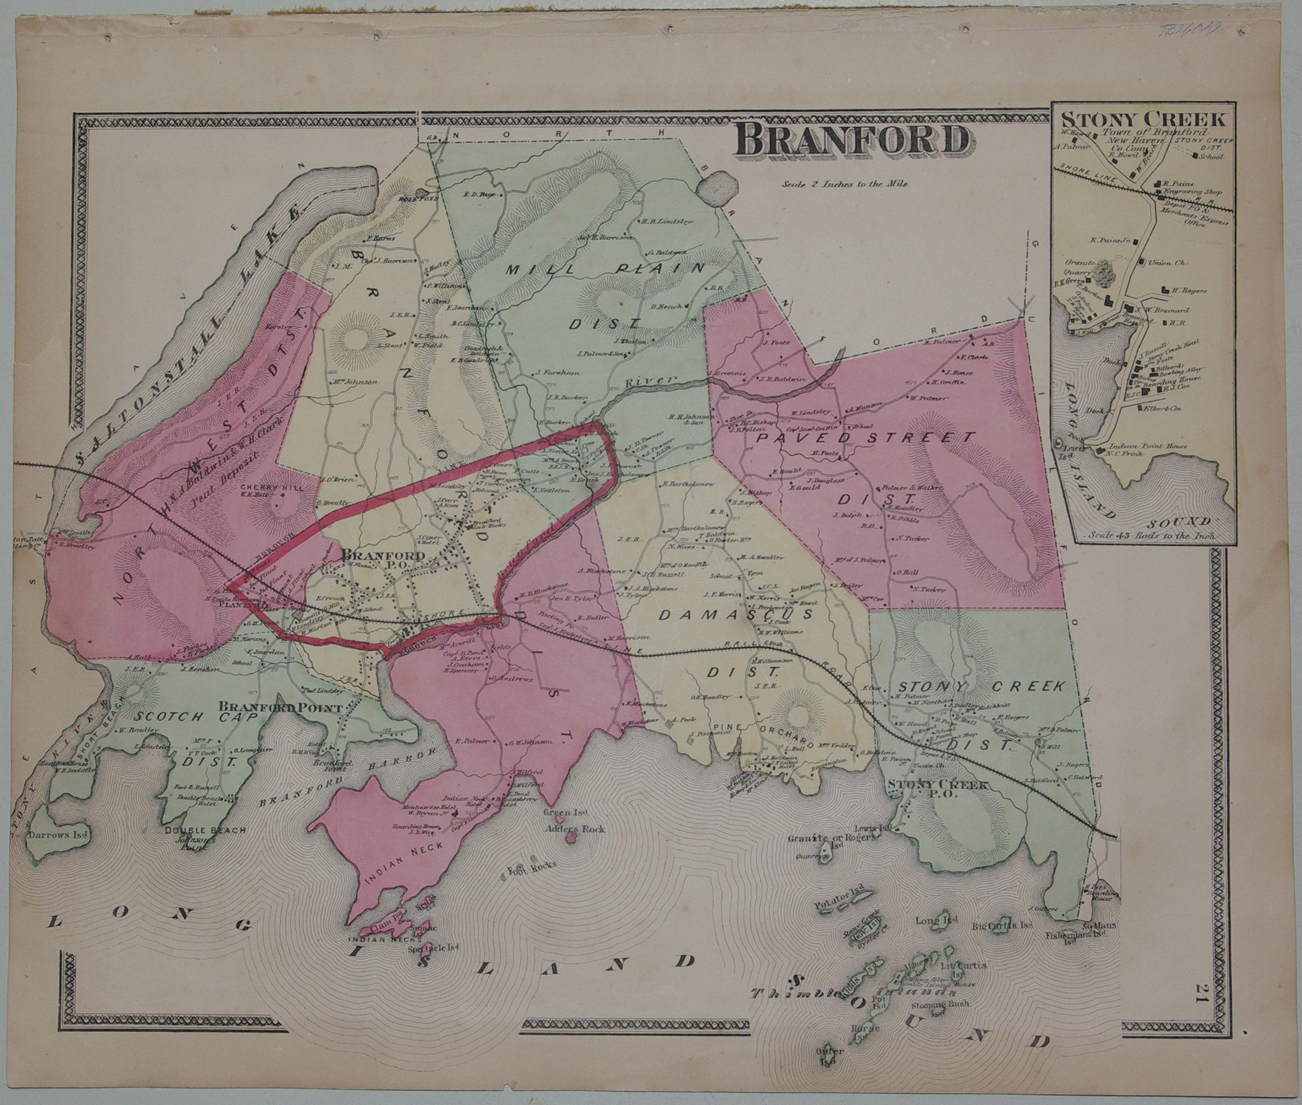 Branford, Ct Map 1868. [Removed From Beers Atlas of New Haven County, Ct] F. W. Beers